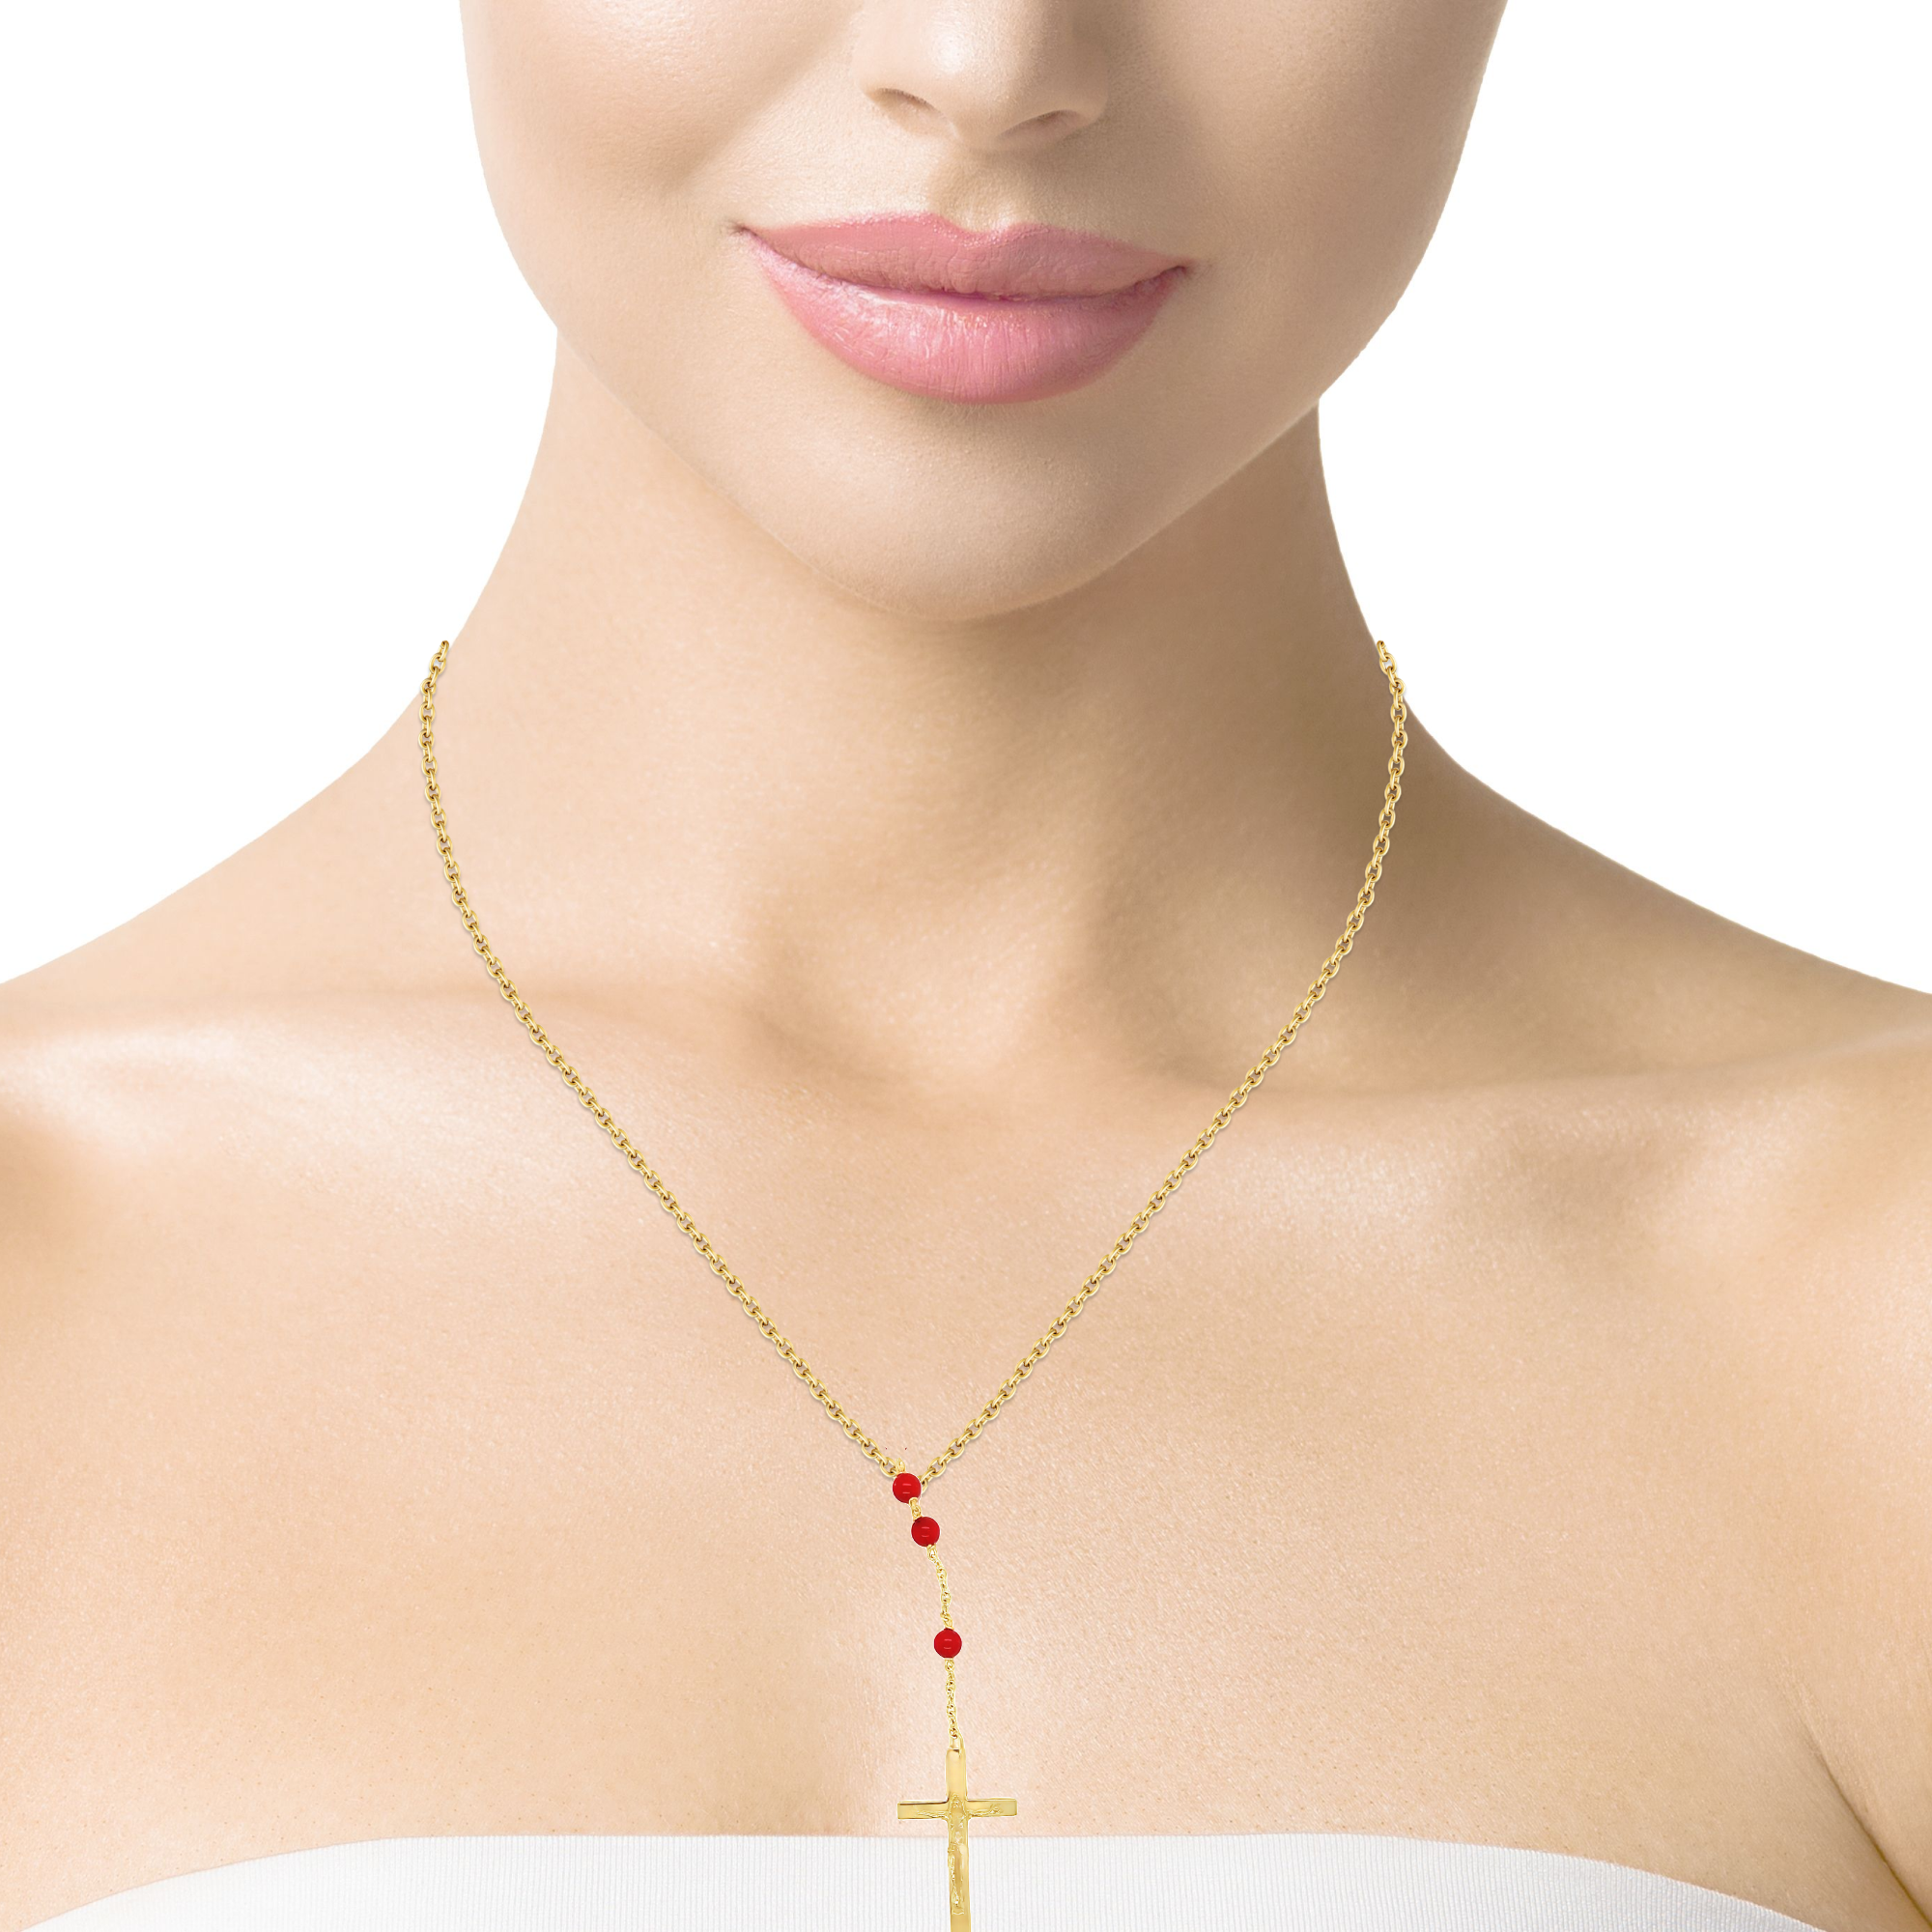 This 18k Italian Yellow Gold Coral Rosary Necklace features a 28" long chain with 4.00mm beads from Corsica, a matte finished Cross charm and a high polished crucifix. 